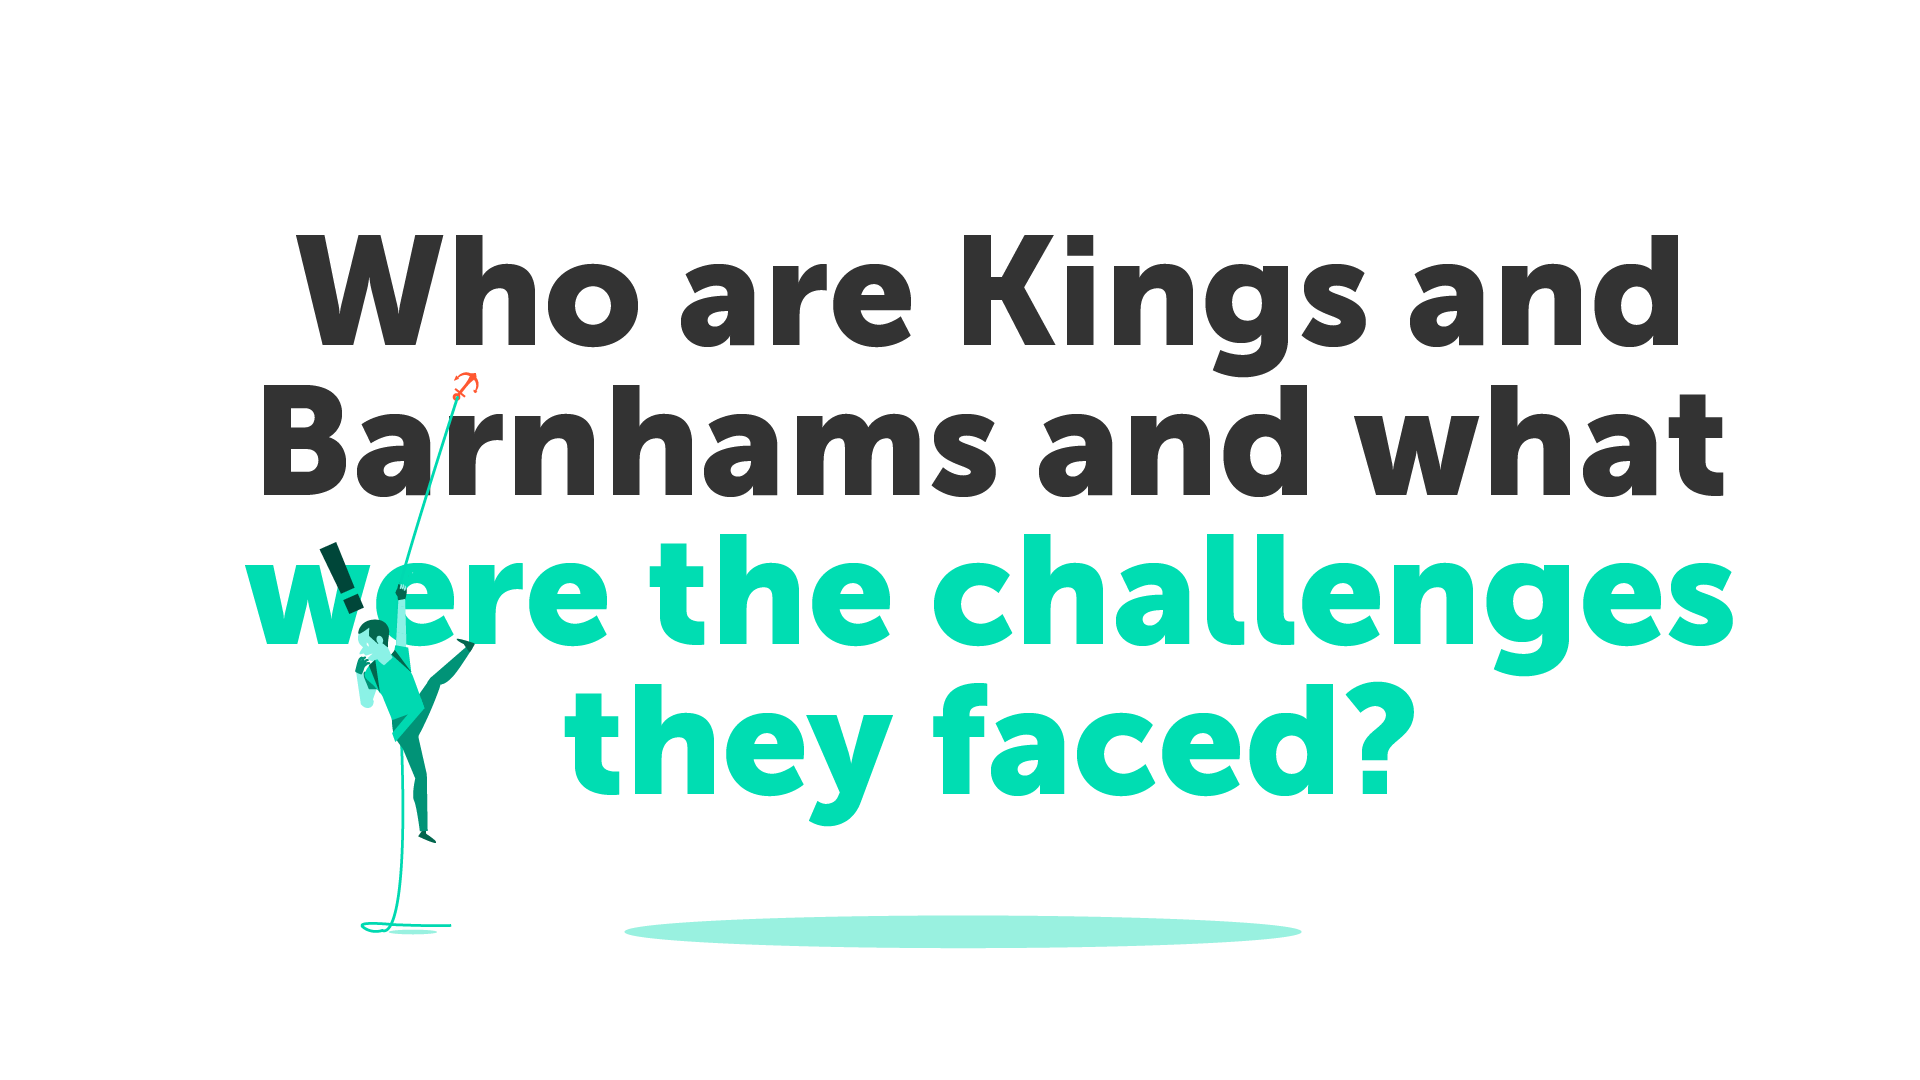 Who are Kings and Barnhams and what were the challenges they faced?